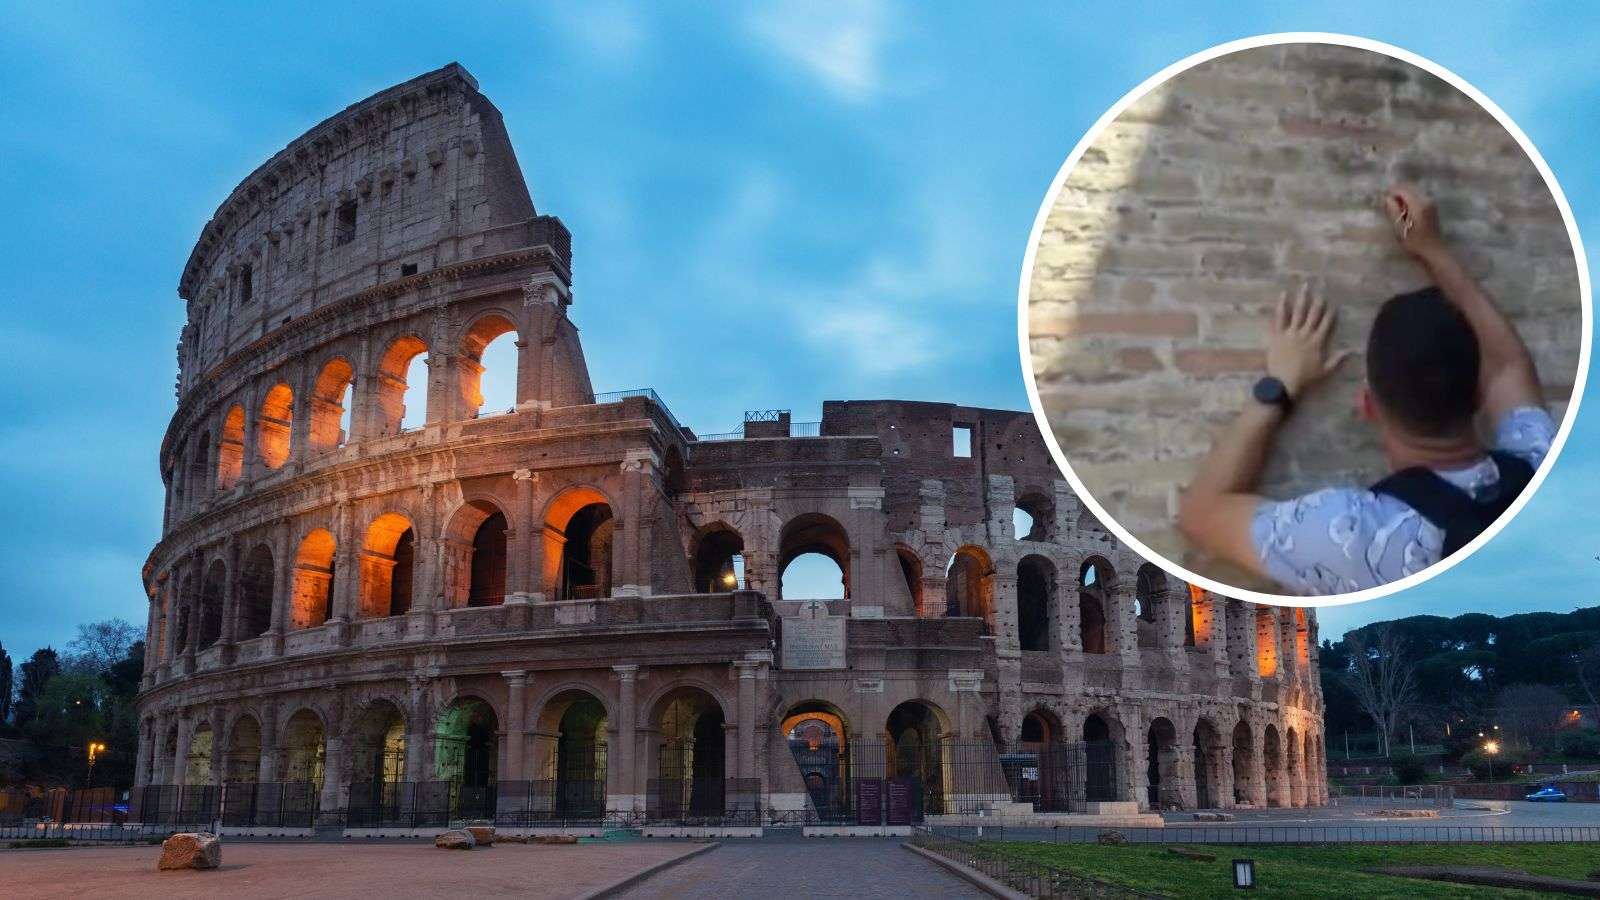 Man carves names into the Colosseum